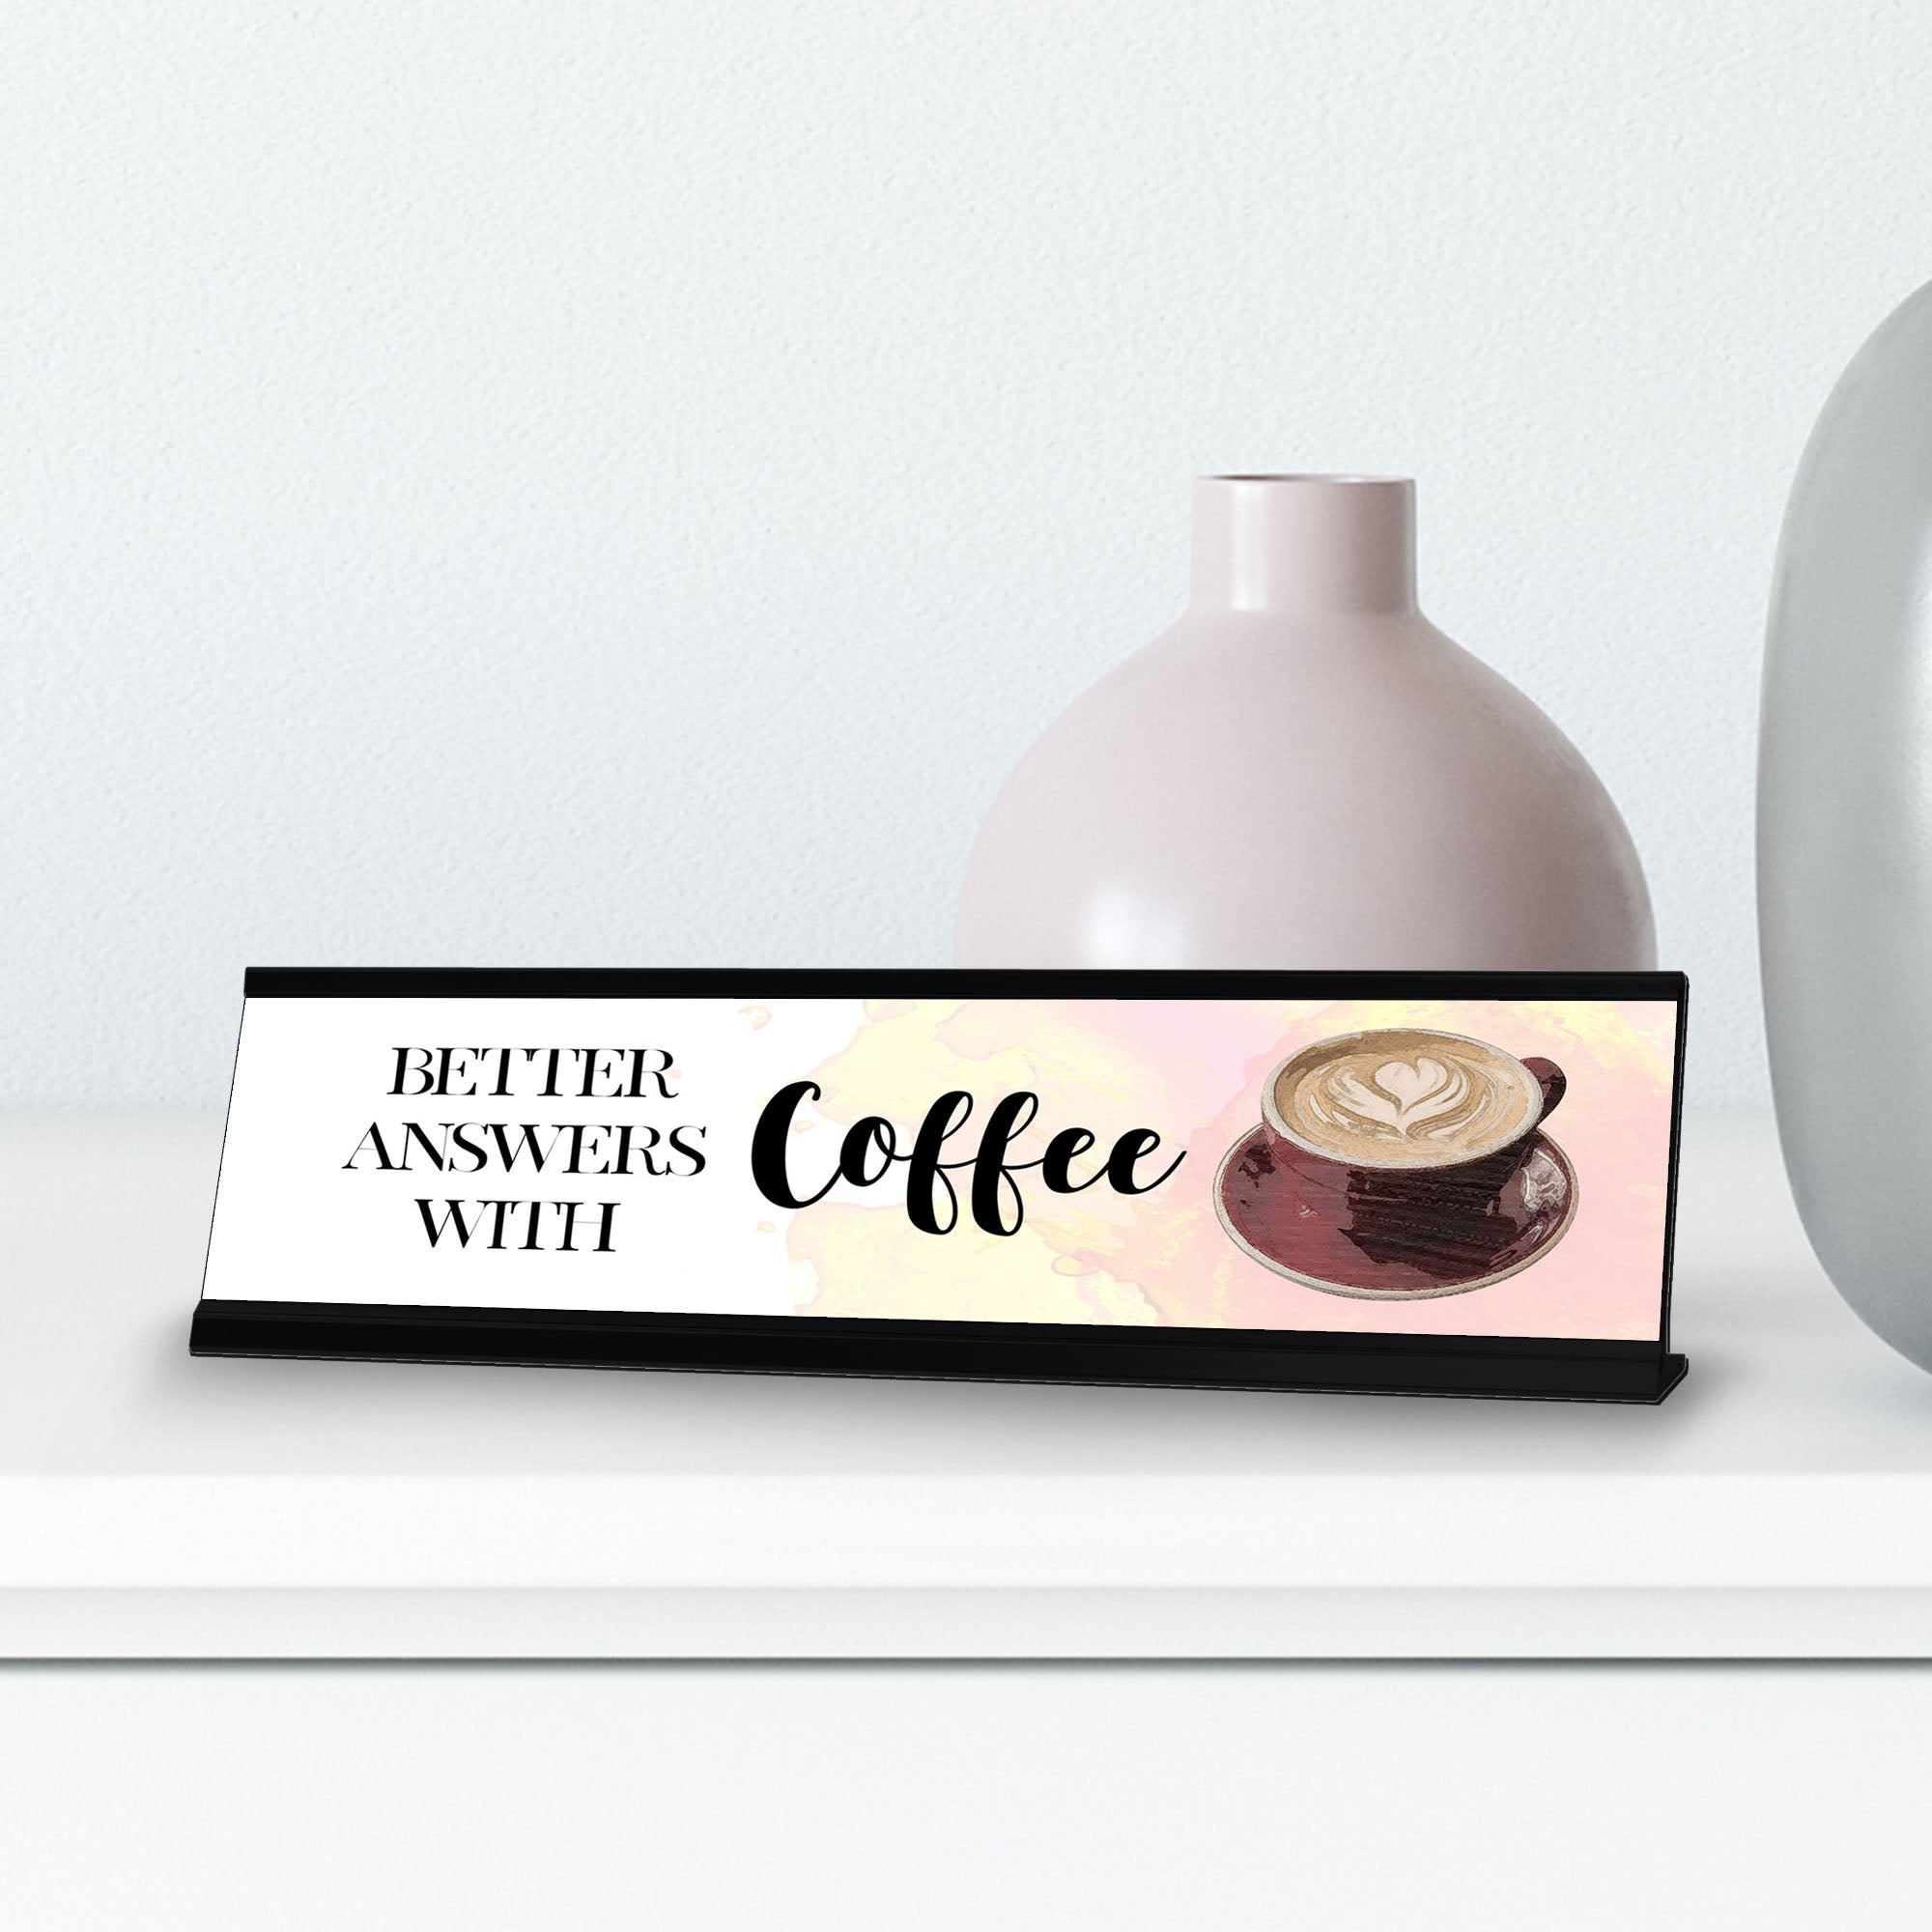 Better Answers With Coffee Desk Sign, novelty nameplate (2 x 8")